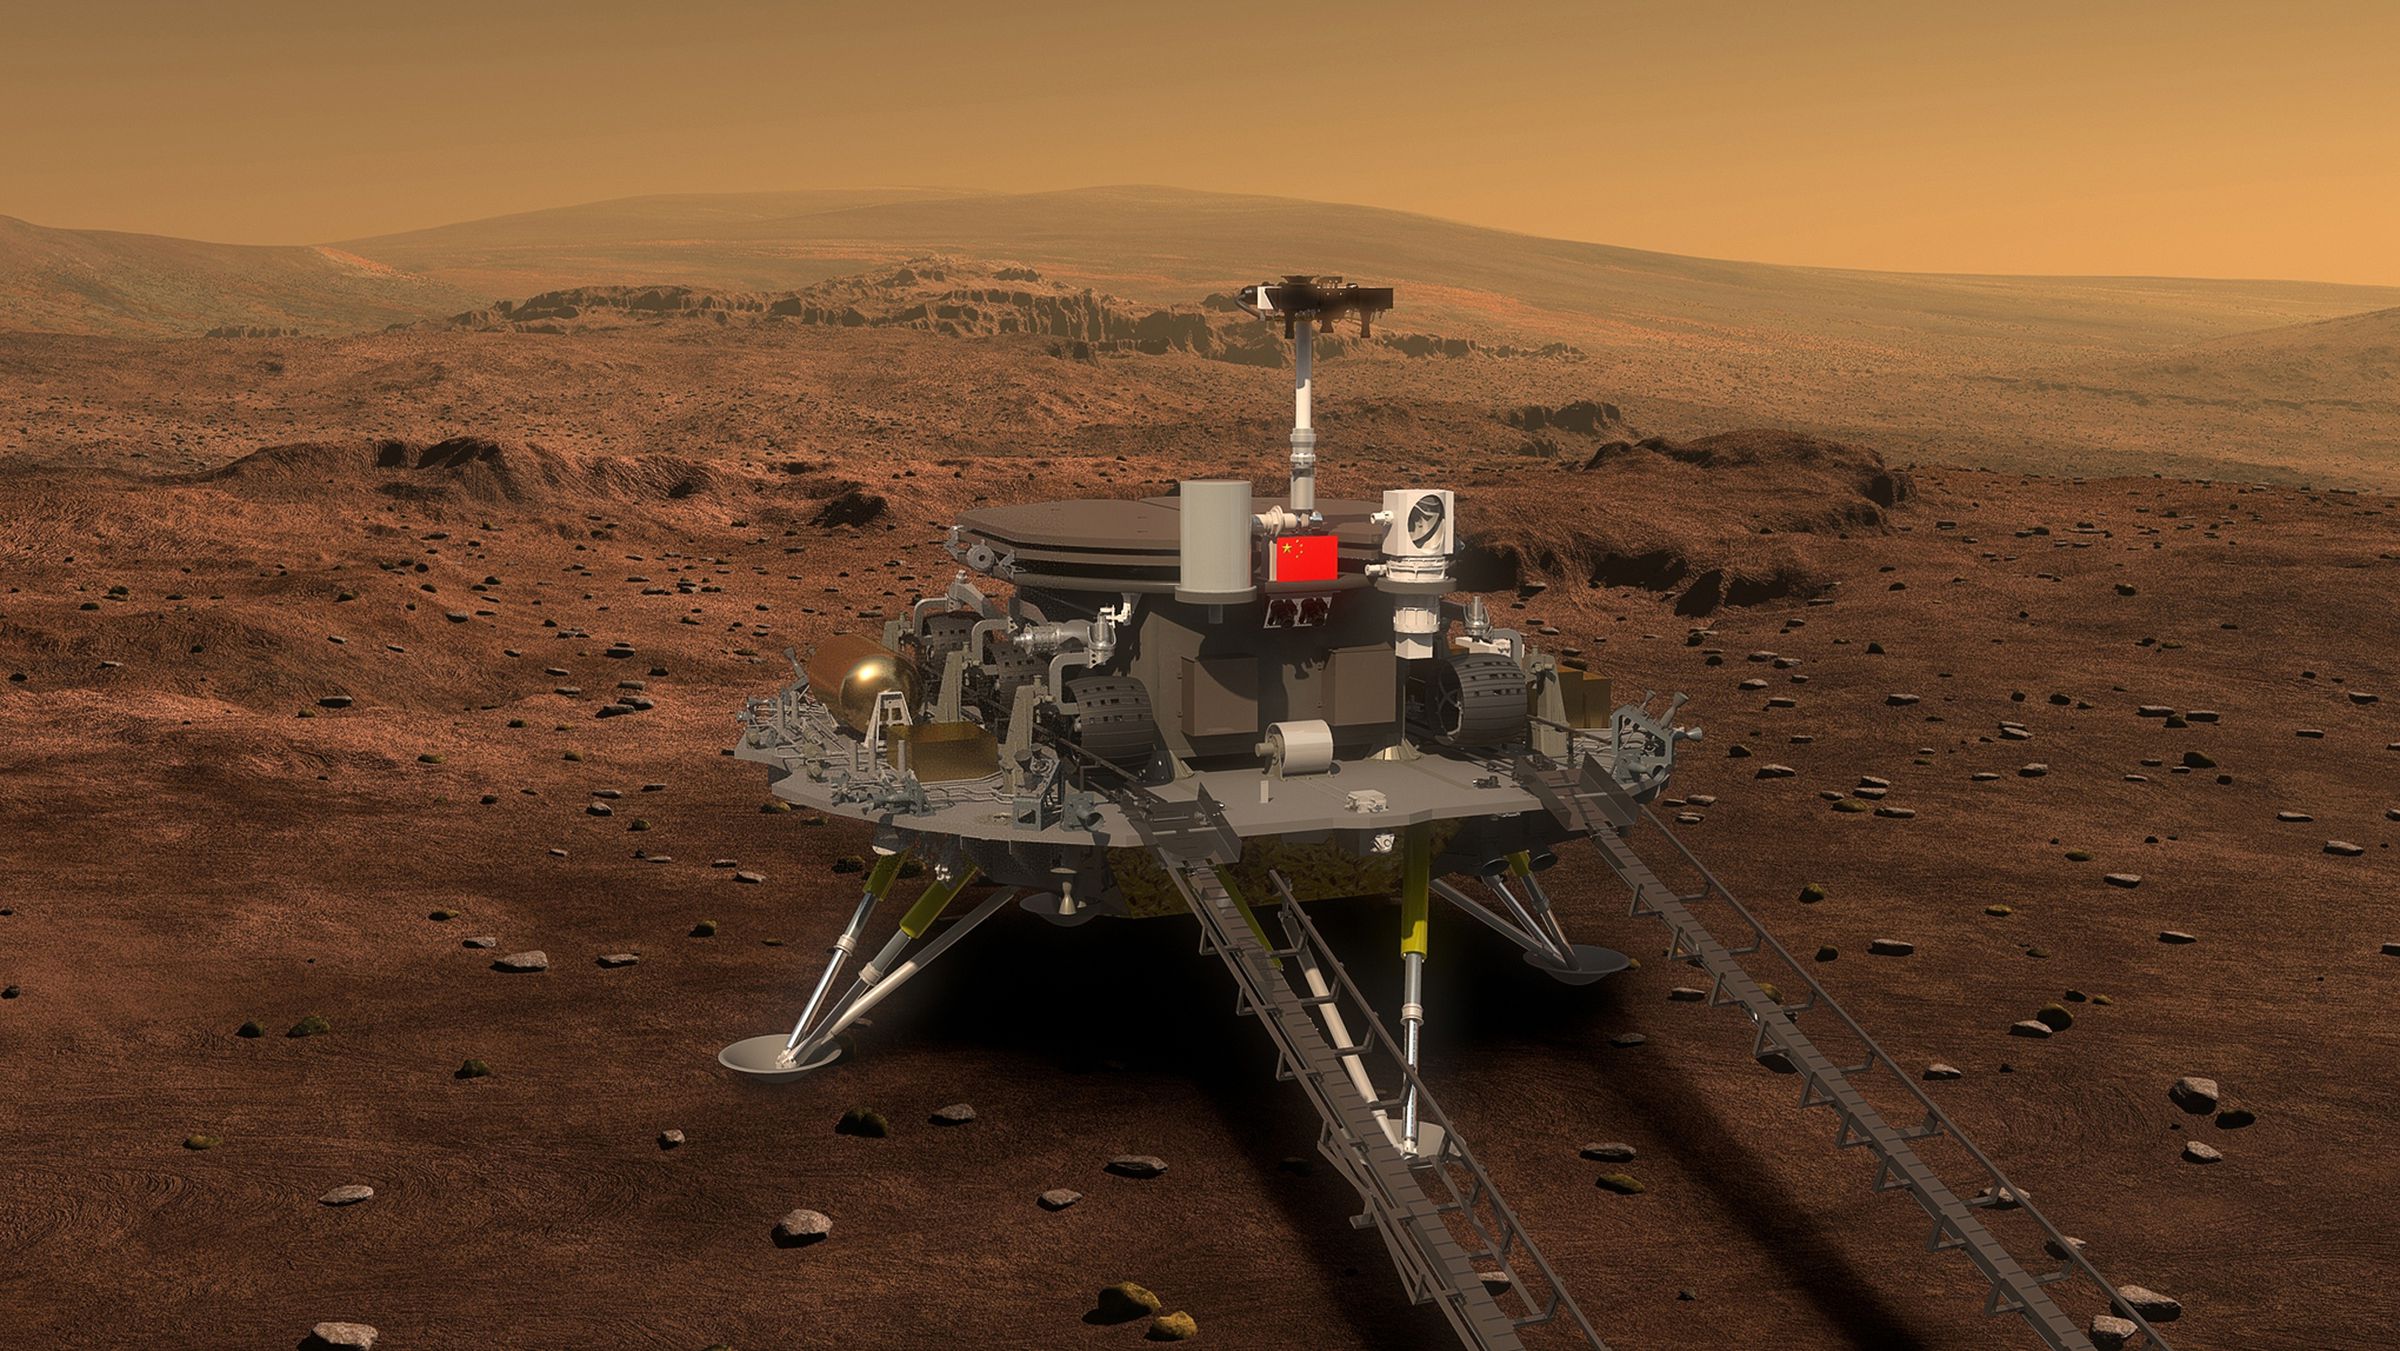 A rendering of the lander China hopes to send to Mars.